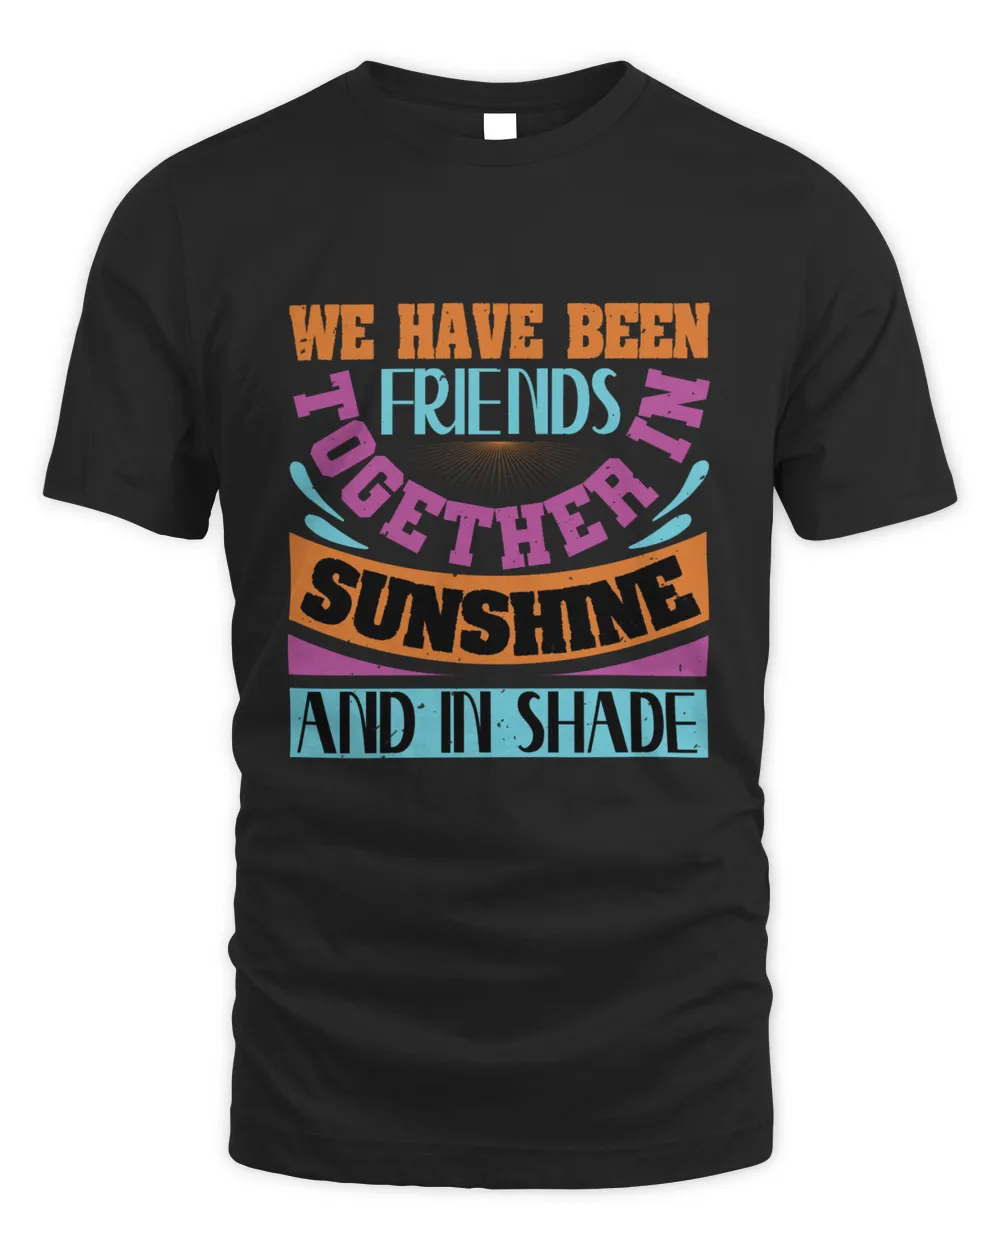 We Have Been Friends Together In Sunshine And In Shade Bestie Gift, Best Friend Gift, Best Friend T Shirt, Bestie Shirt, Best Friend Shirt, Friendship Gift, Best Friend Birthday Gift, Friendship